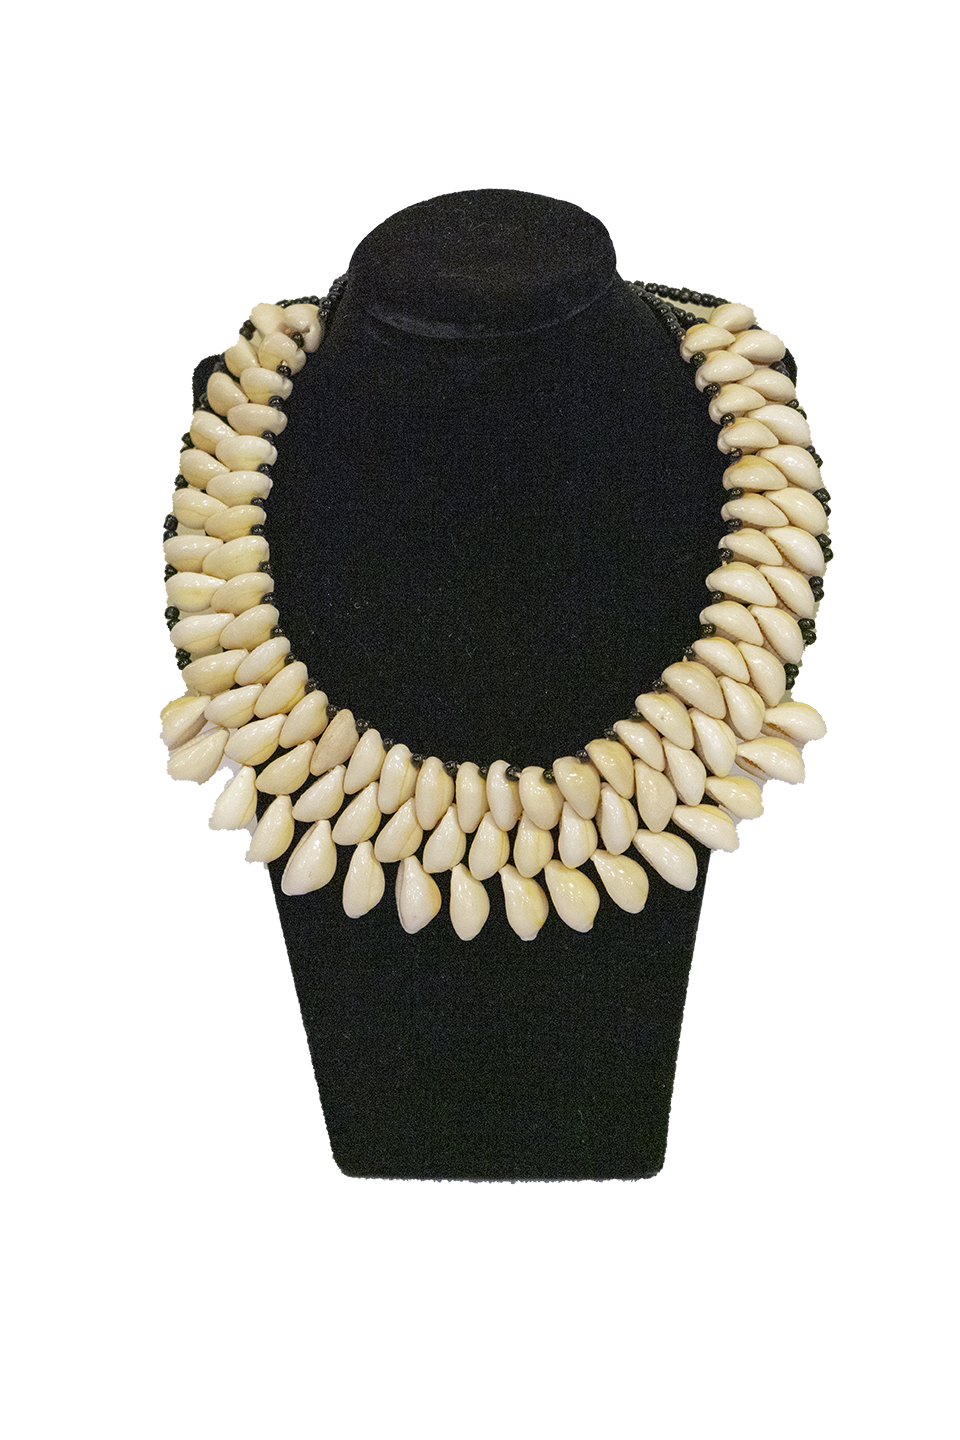 Cowrie Shell Necklace Three Tier Choker